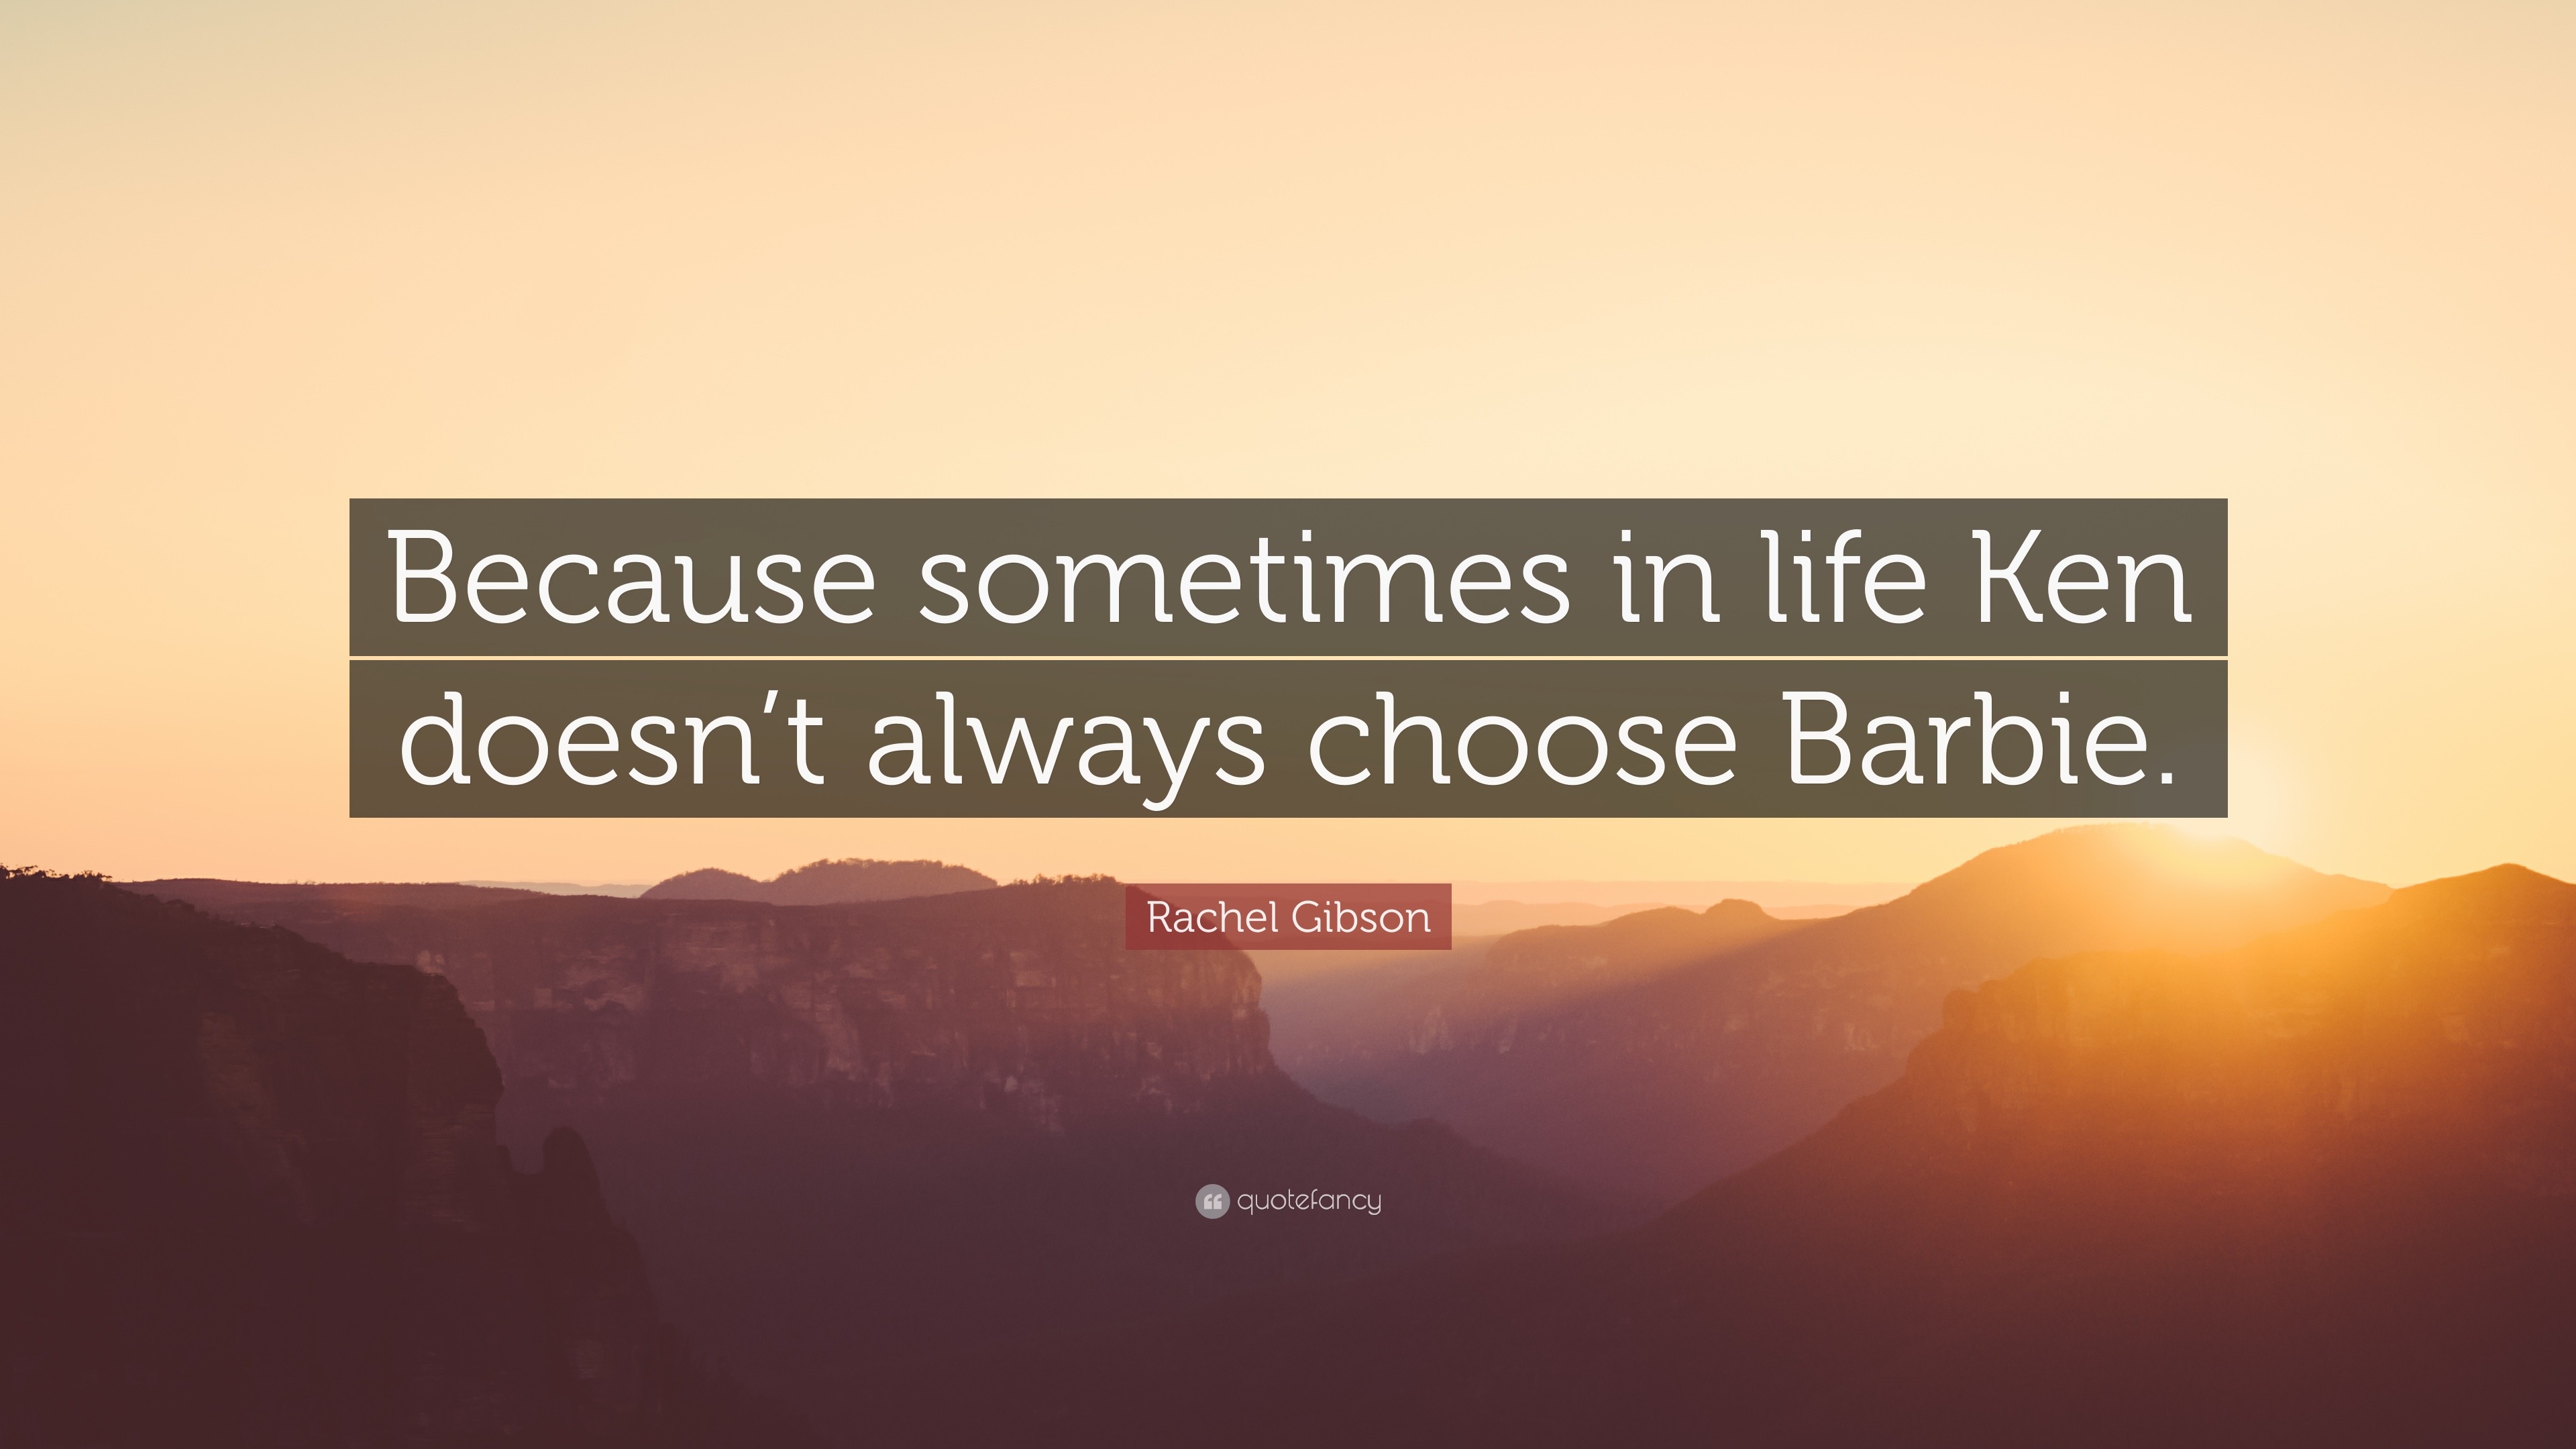 Rachel Gibson Quote: “Because sometimes in life Ken doesn't always choose